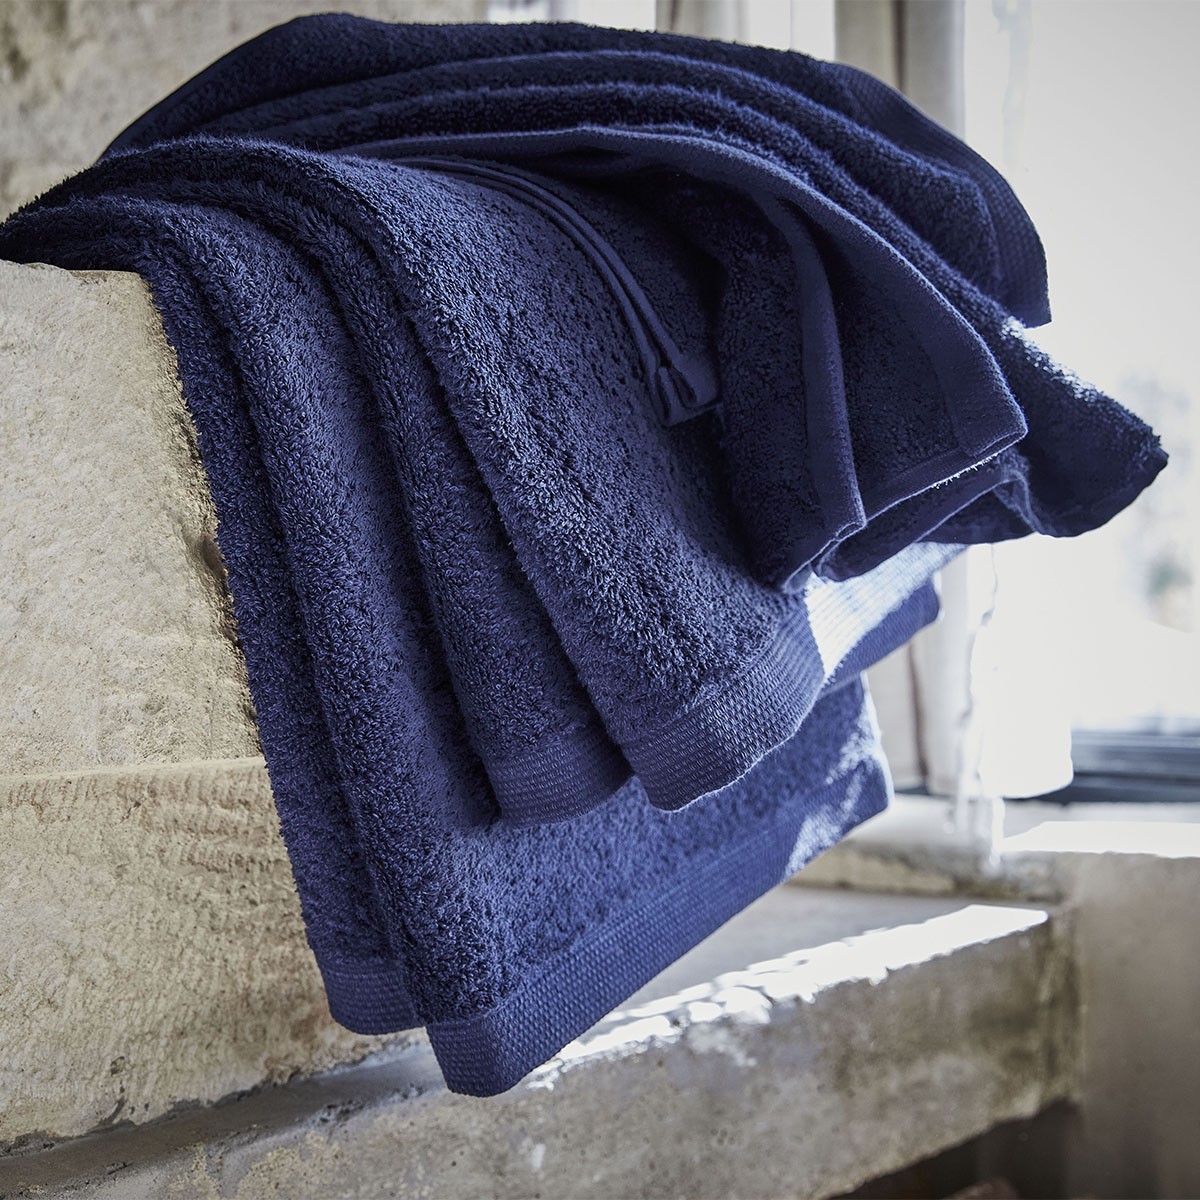 Soft and absorbent bath towels